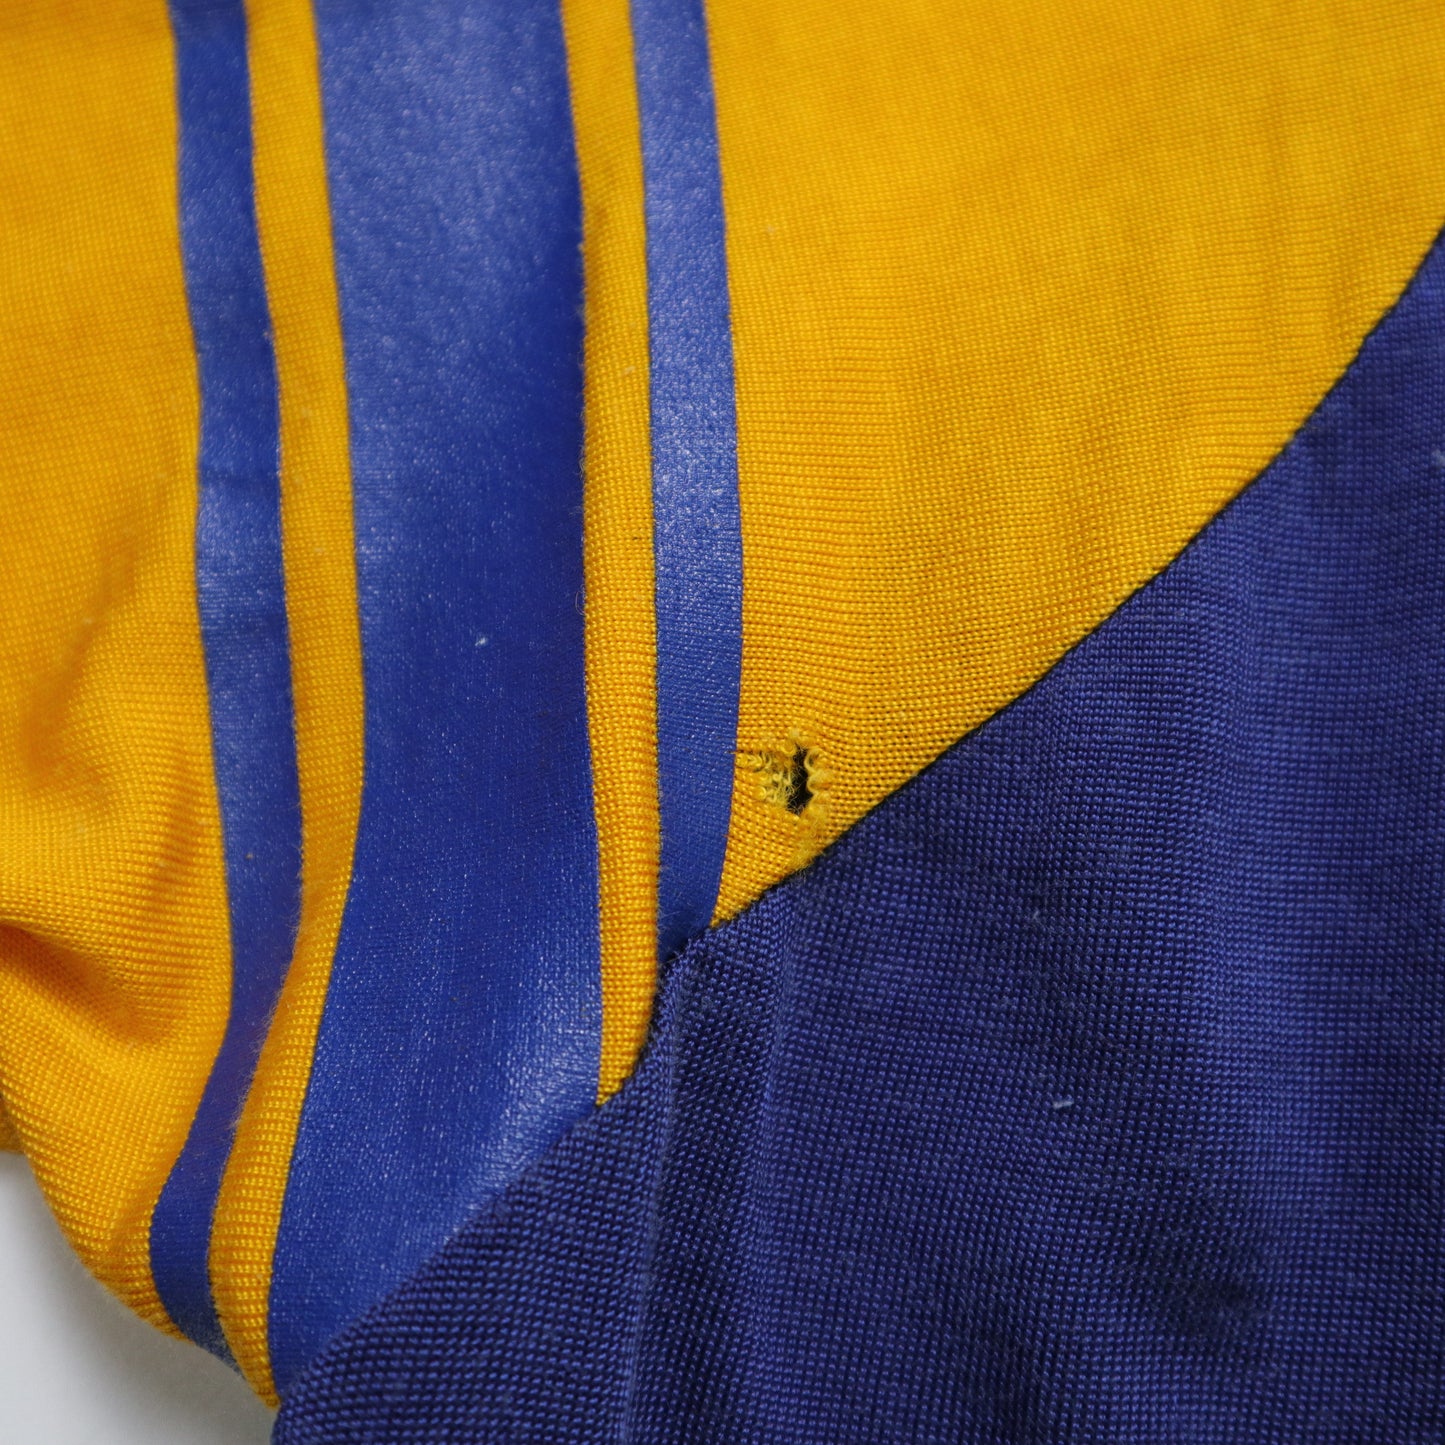 70s Champion American-made JESUIT blue and yellow stitching American football top